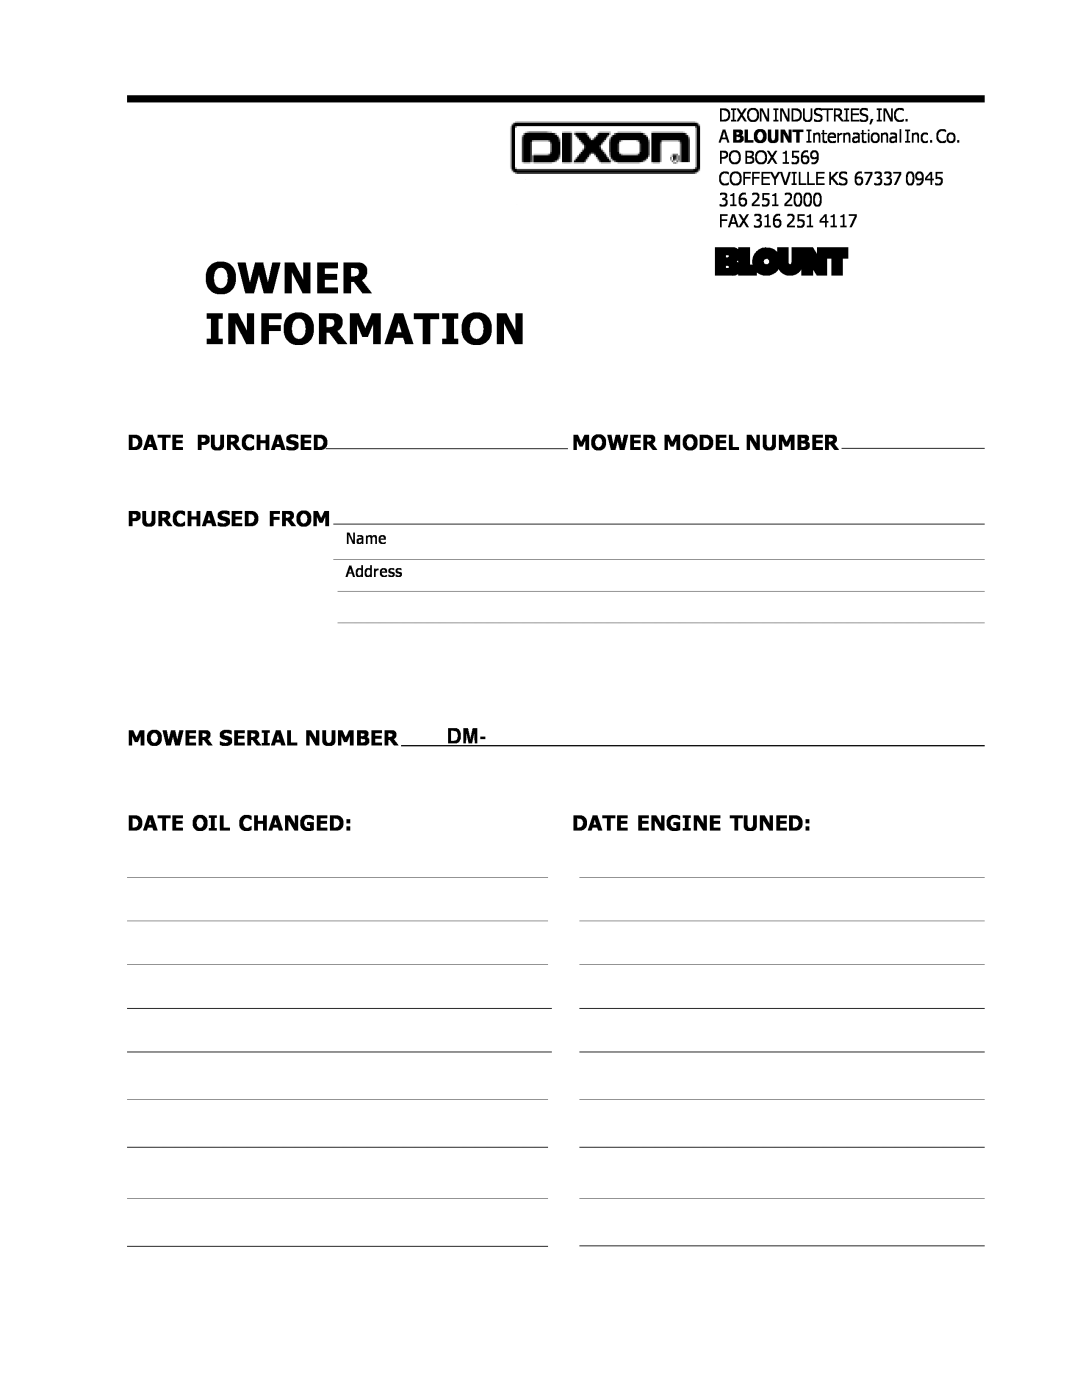 Dixon ZTR 5017 Owner Information, Mower Model Number, Purchased From, Mower Serial Number, Date Oil Changed, FAX 316 251 